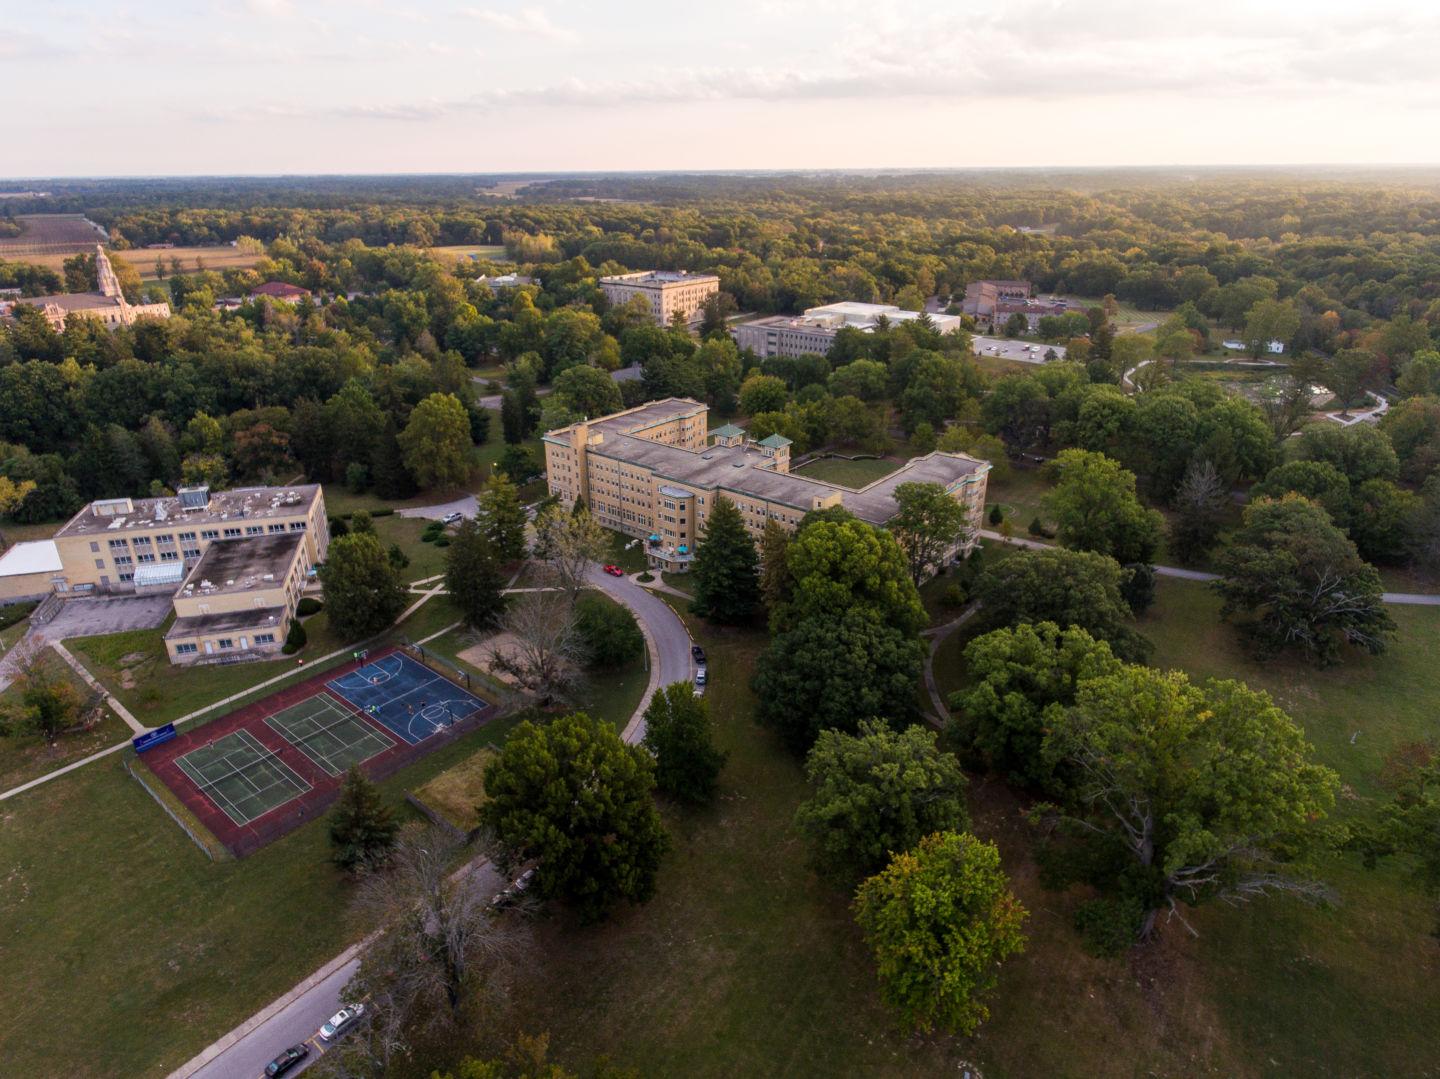 Aerial view of Le Fer Hall from behind